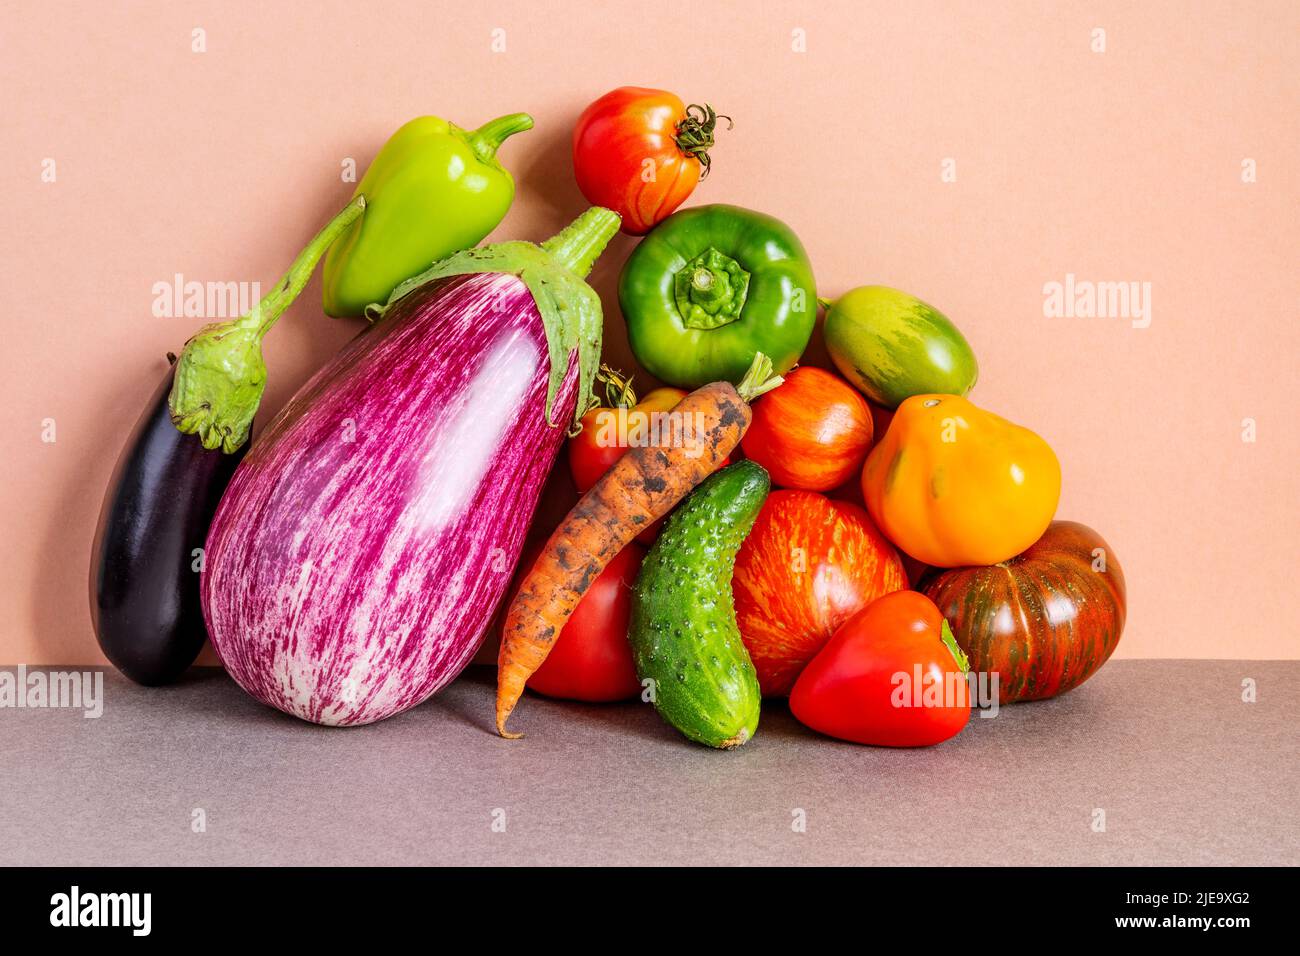 Healthy vegetarian food organic vegetables still life concept. Farm aubergine eggplants, tomatoes of various grade, bell peppers, carrot and cucumber Stock Photo